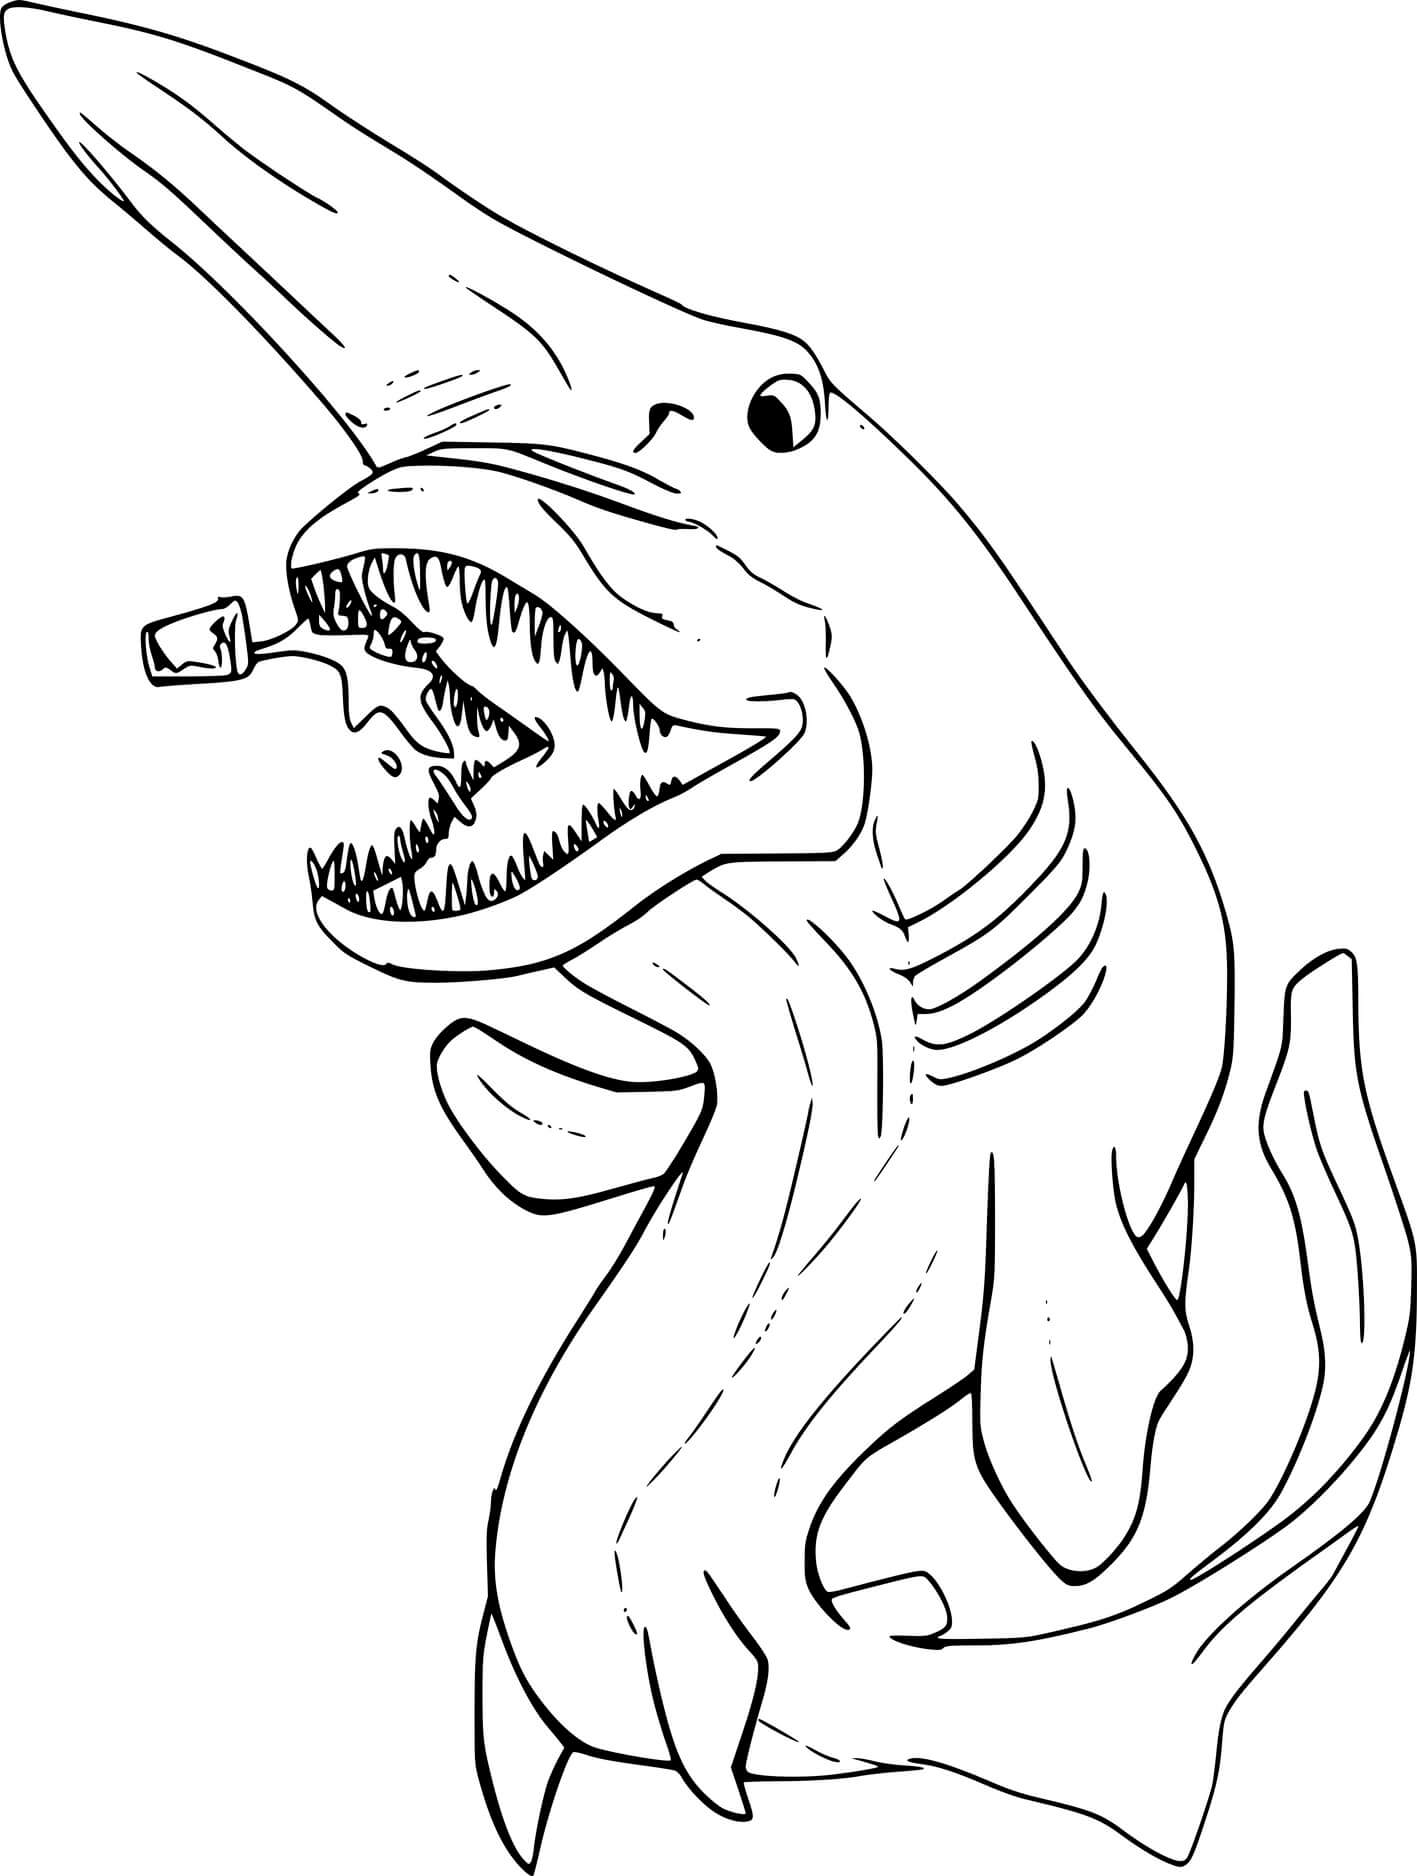 Goblin Shark Drinking Beer Coloring Page